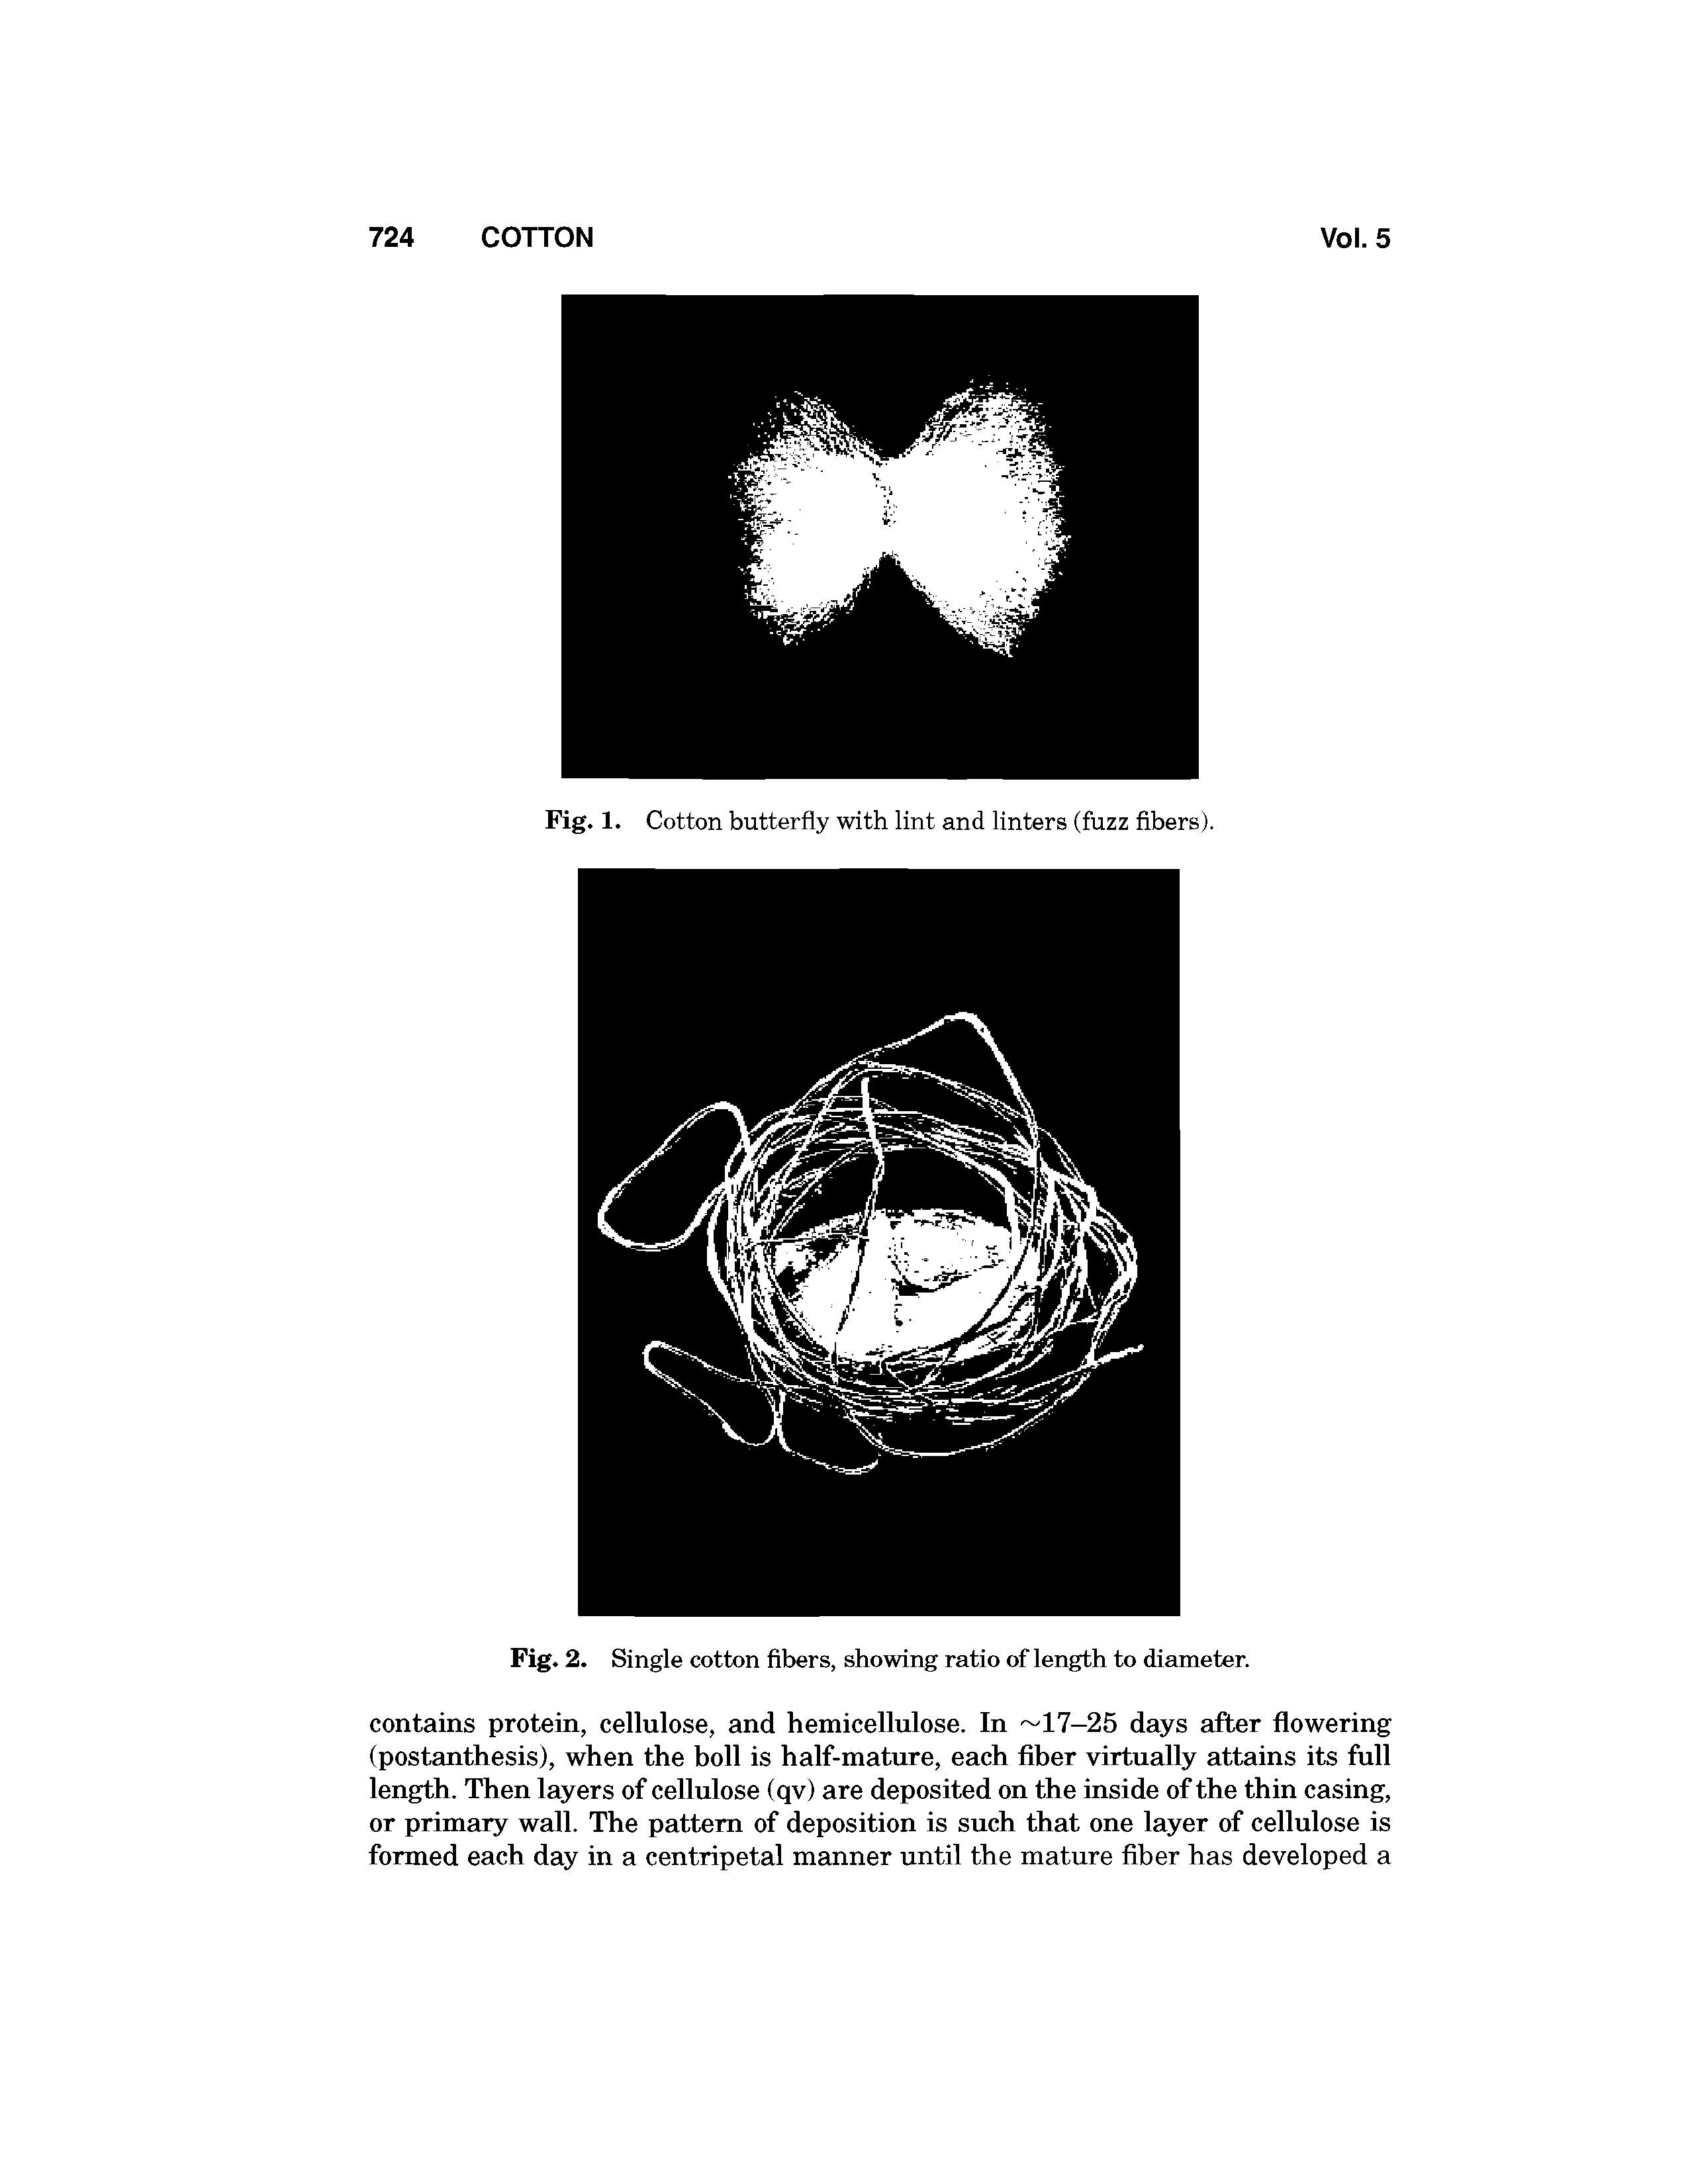 Fig. 1. Cotton butterfly with lint and linters (fuzz fibers).